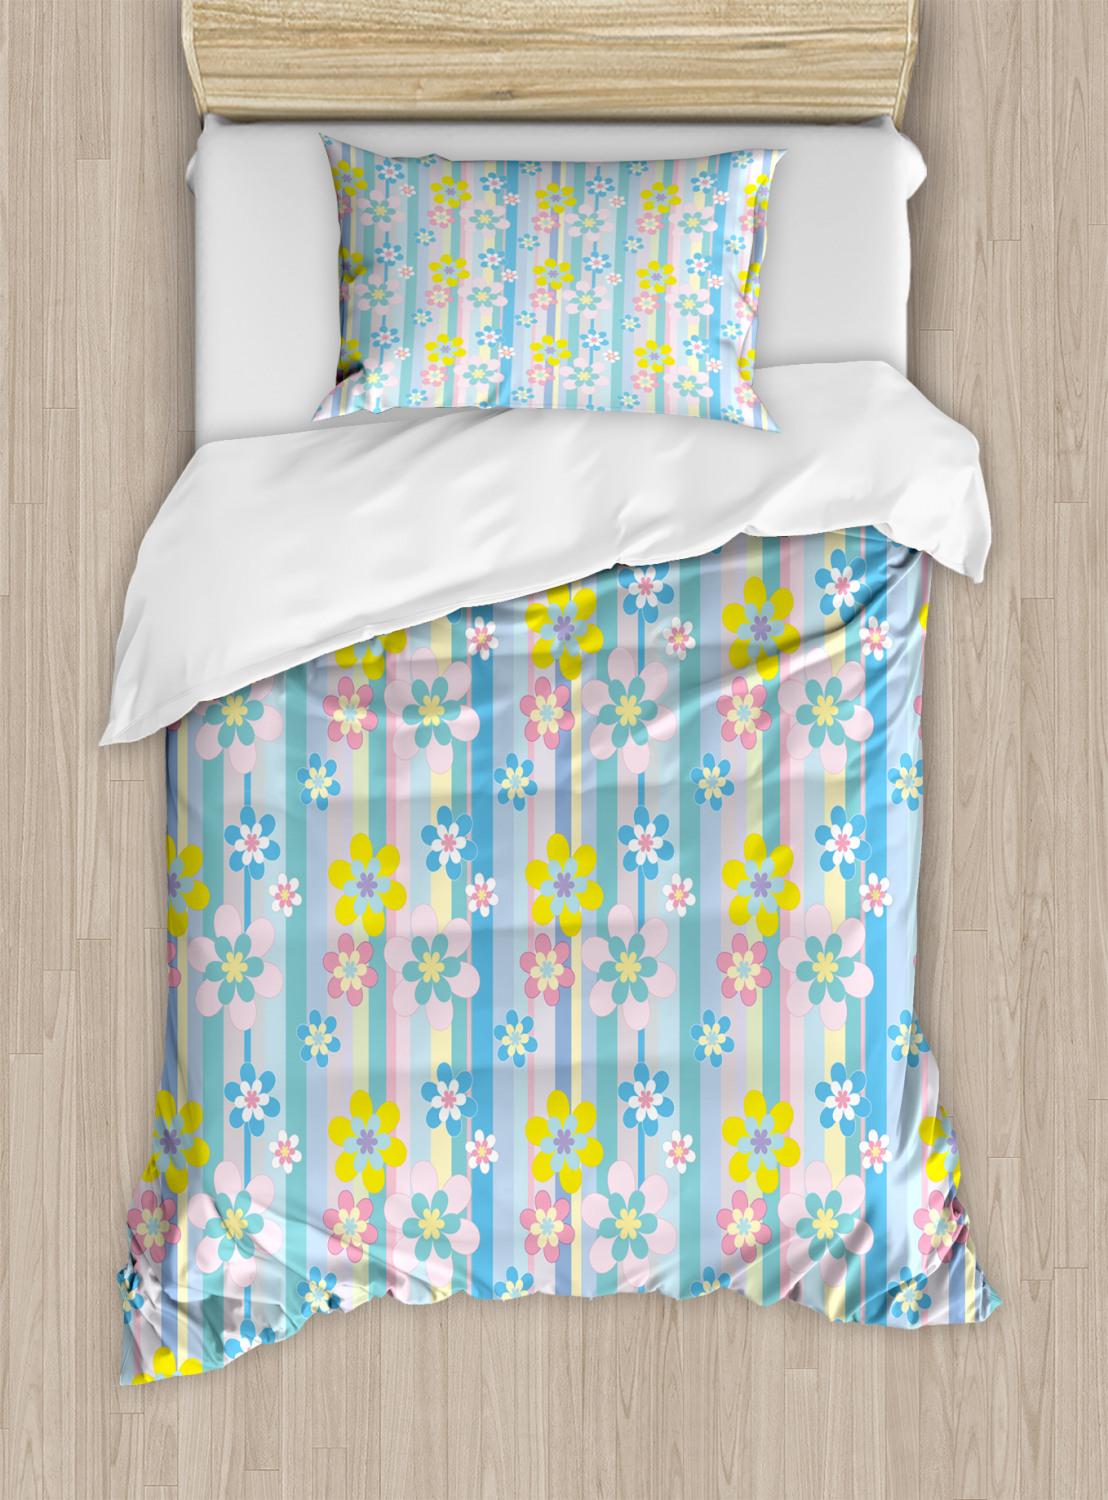 Details about   Pastel Quilted Bedspread & Pillow Shams Set Abstract Spring Daisies Print 